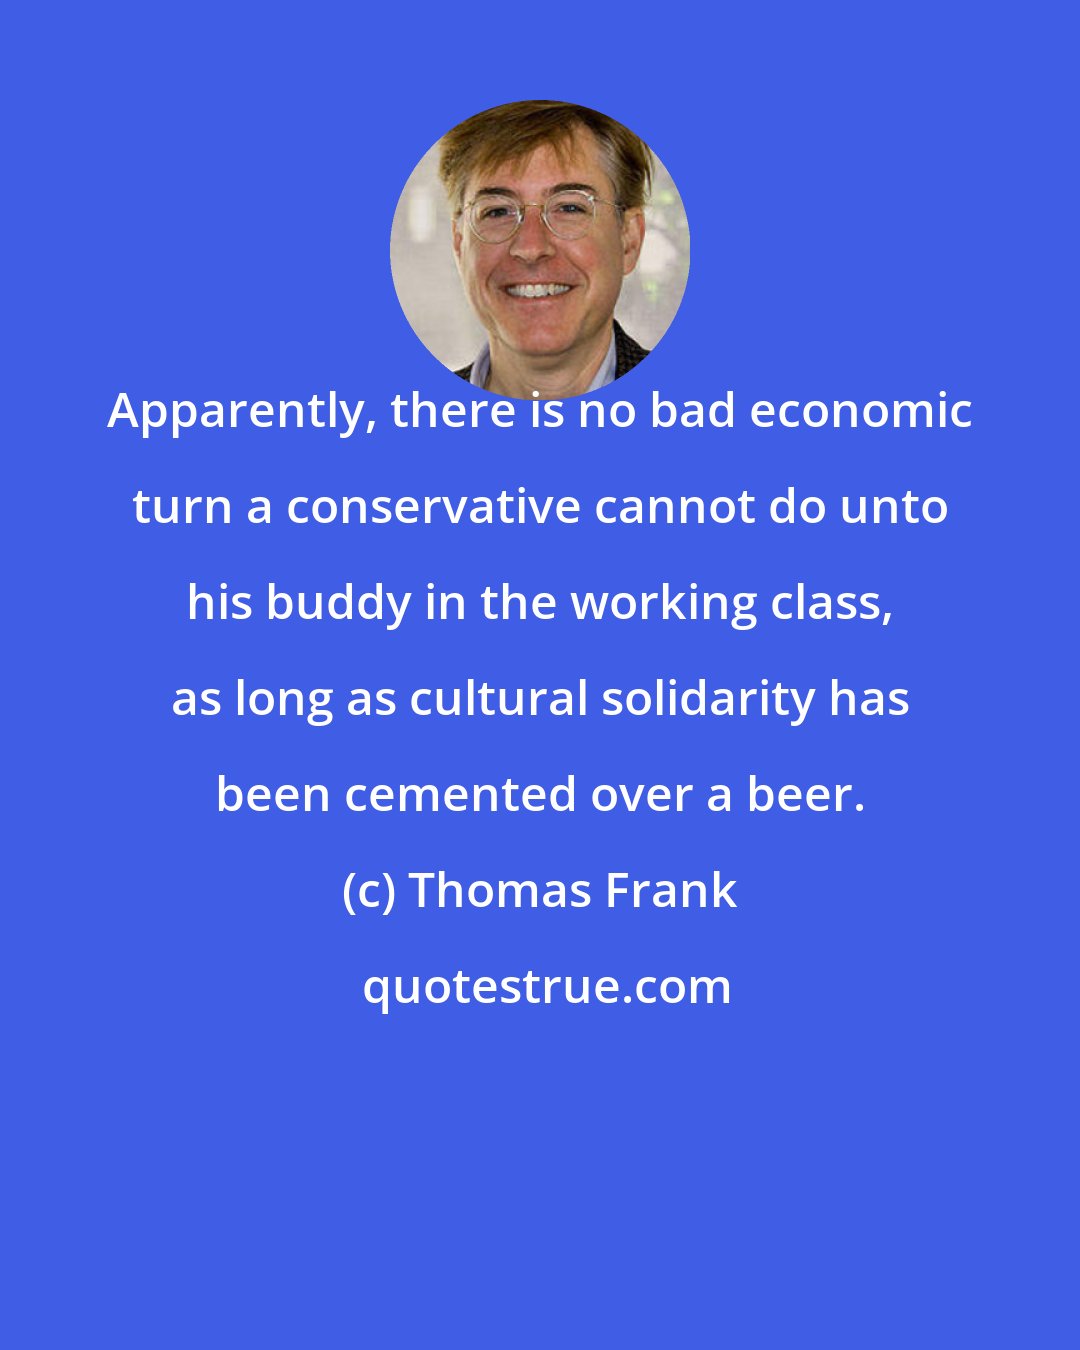 Thomas Frank: Apparently, there is no bad economic turn a conservative cannot do unto his buddy in the working class, as long as cultural solidarity has been cemented over a beer.